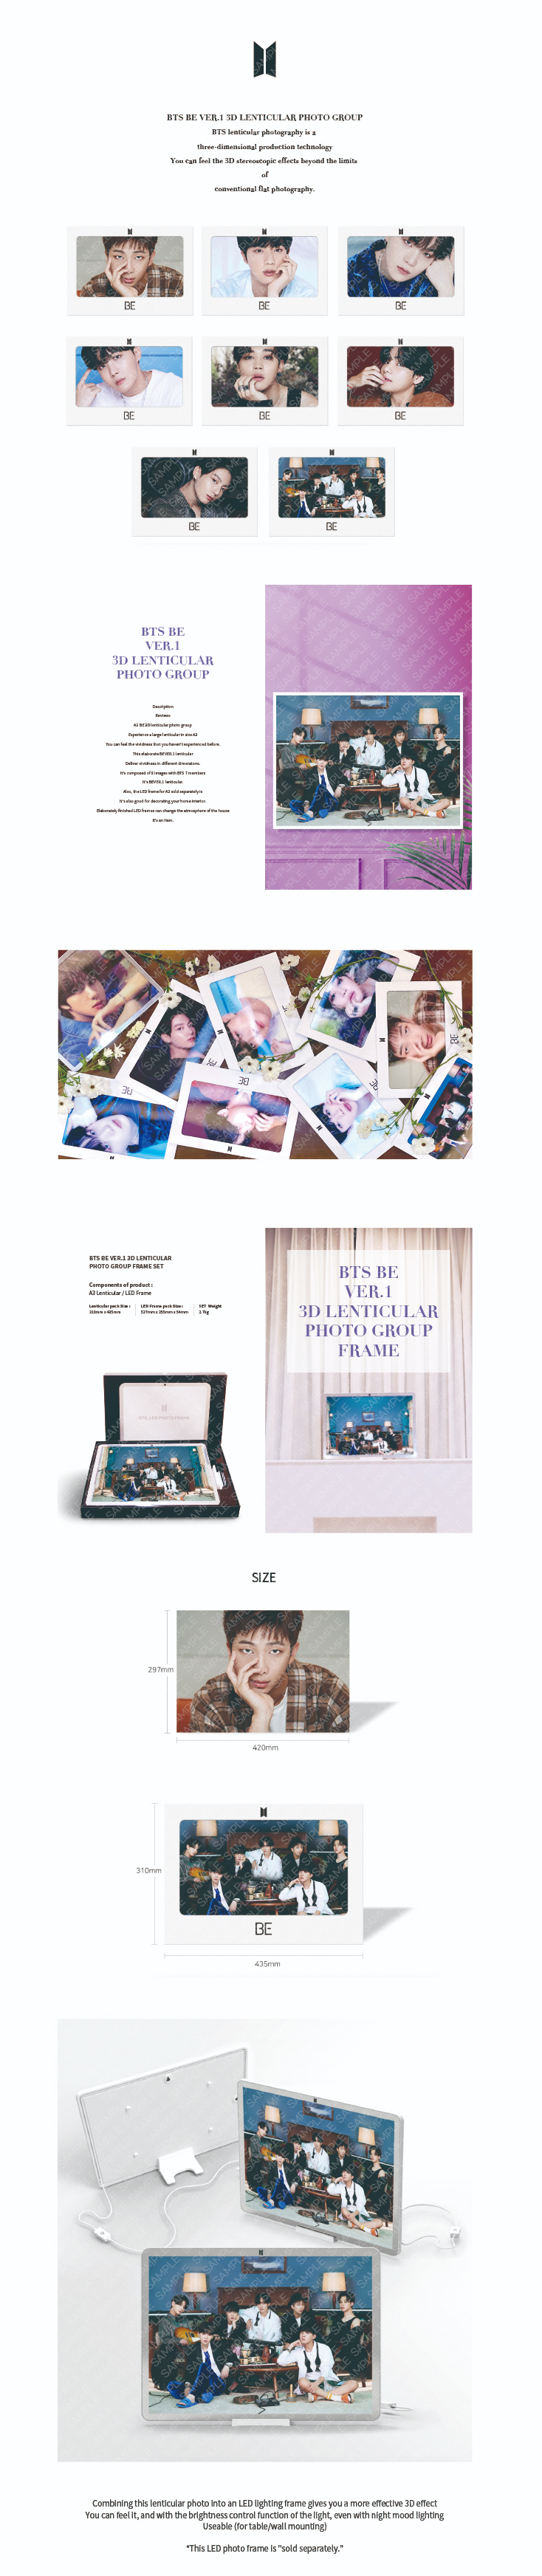 A3 SIZE BTS BE 3D LENTICULAR_Group